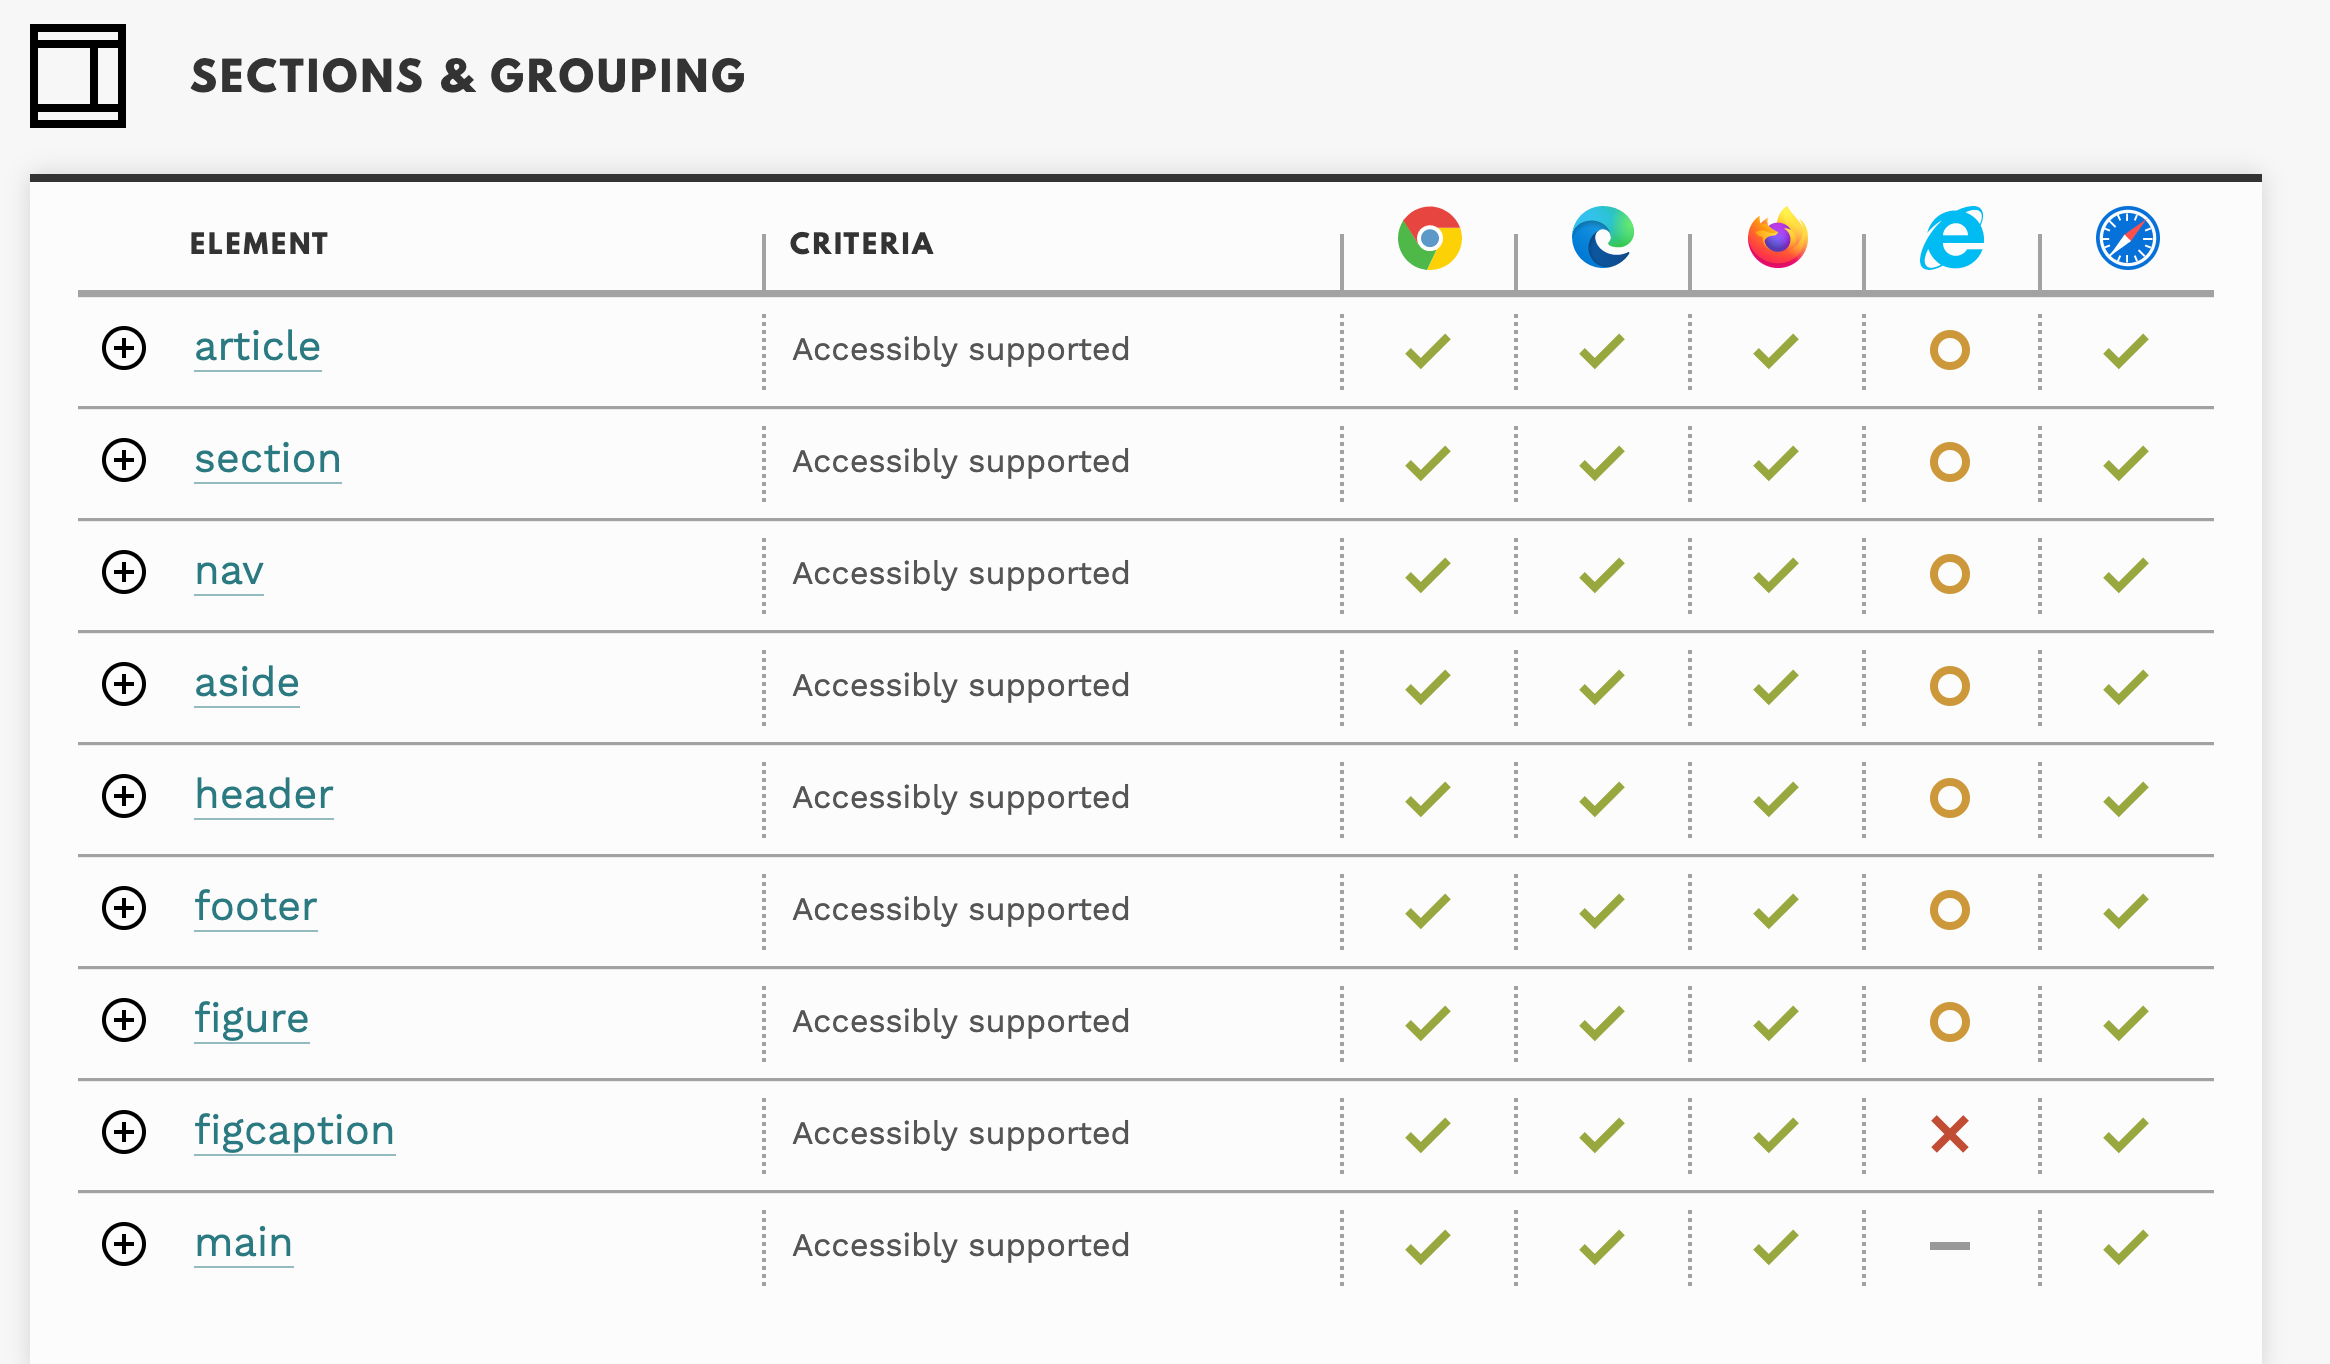 Table showing HTML5 elements accessibility support from HTML5 Accessibility Website